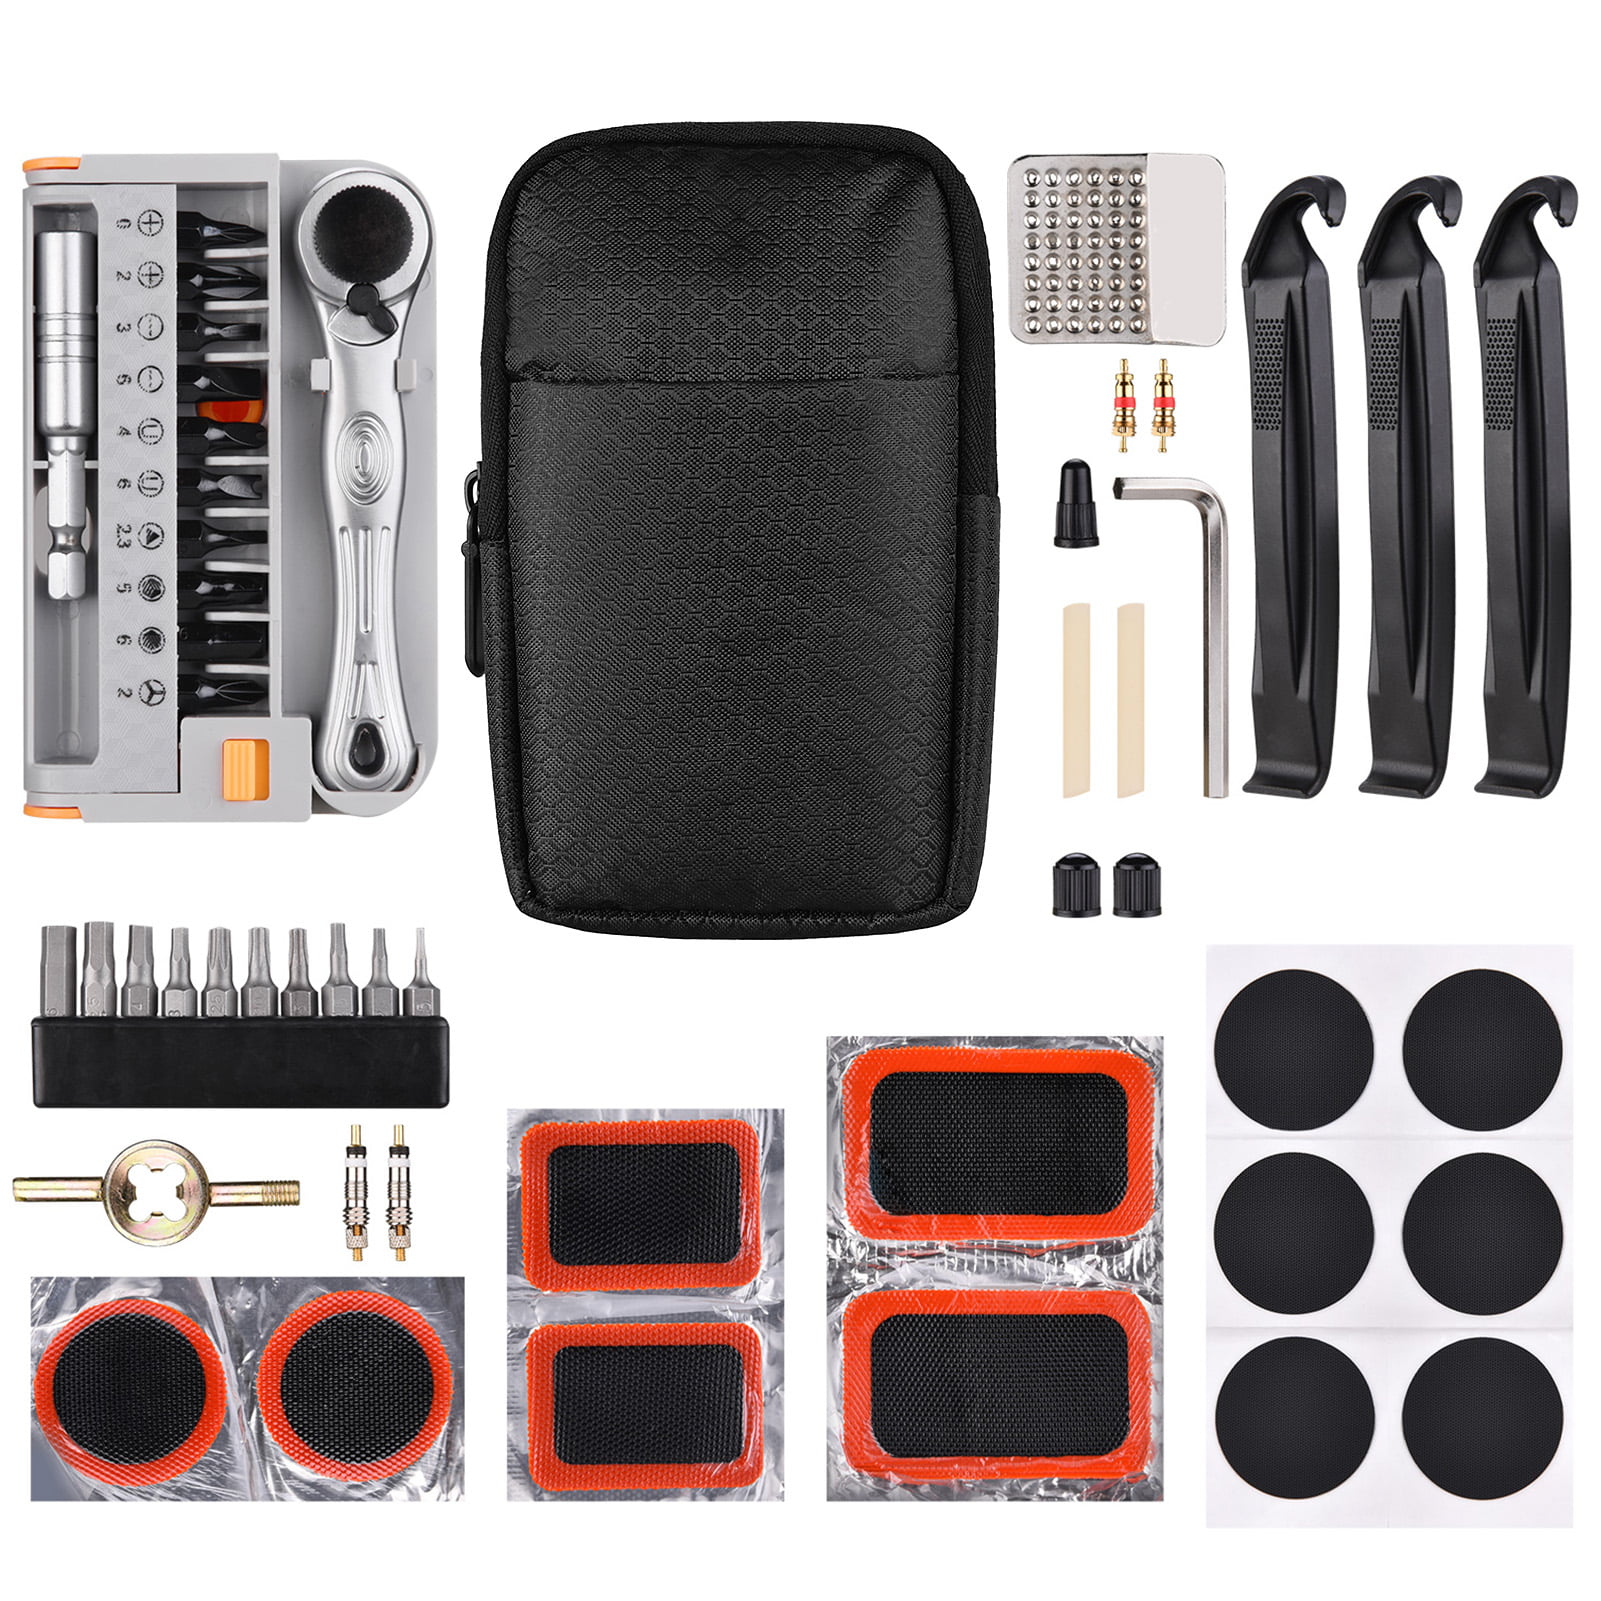 Details about   Portable Bicycle Repair Kits Bag Multi Function MTB Road Equipment Wrench Tool 